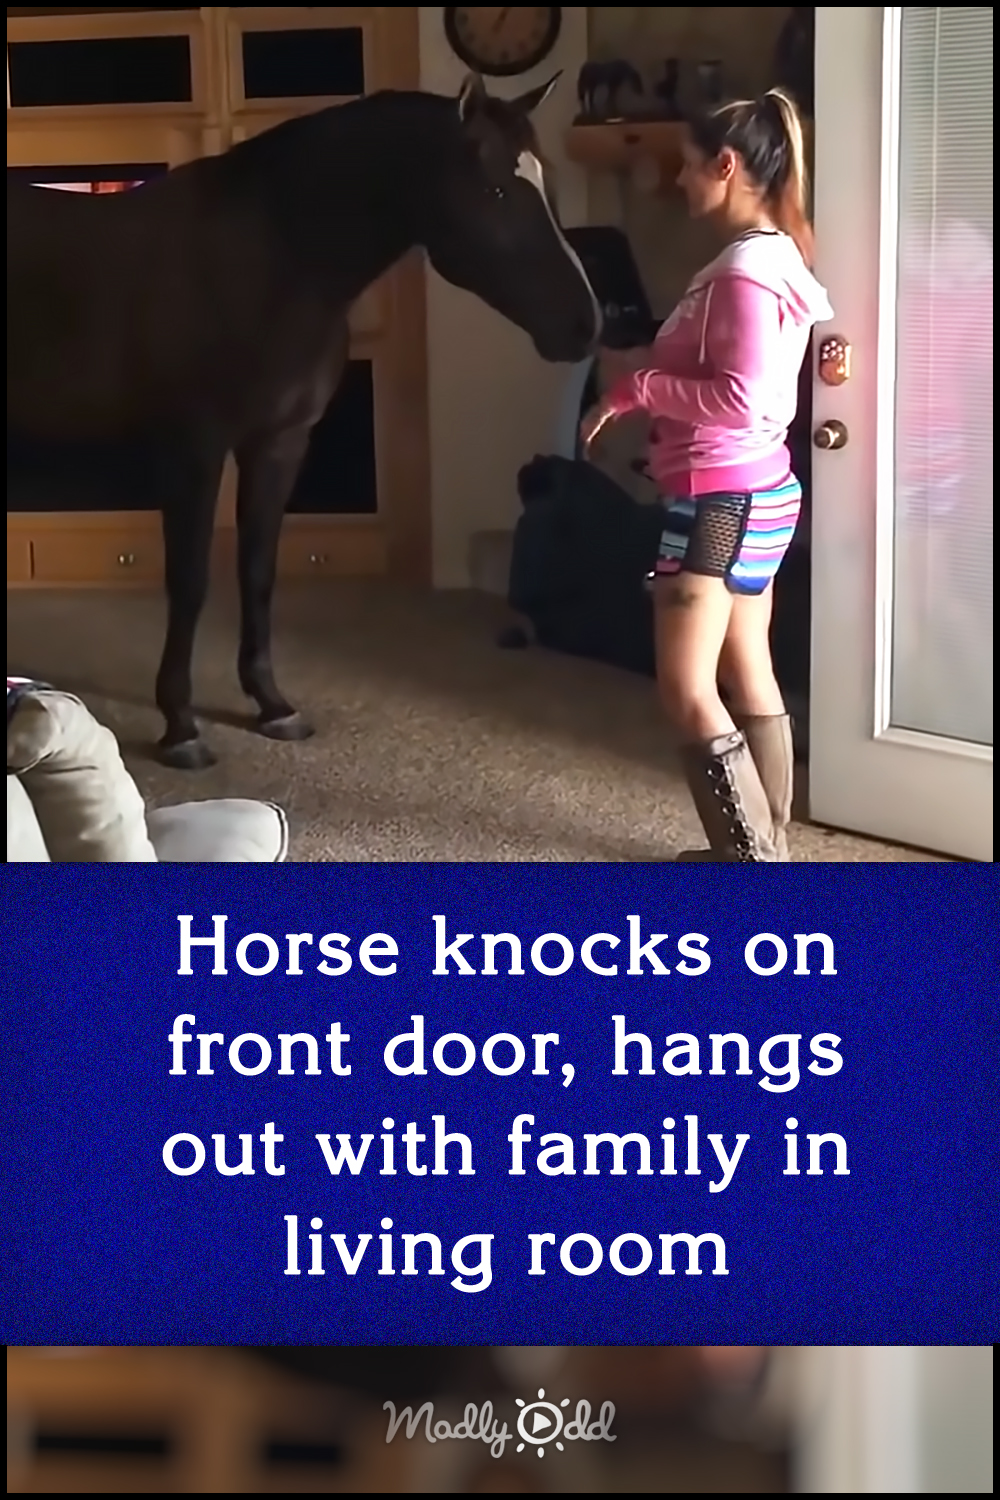 Horse knocks on front door, hangs out with family in living room